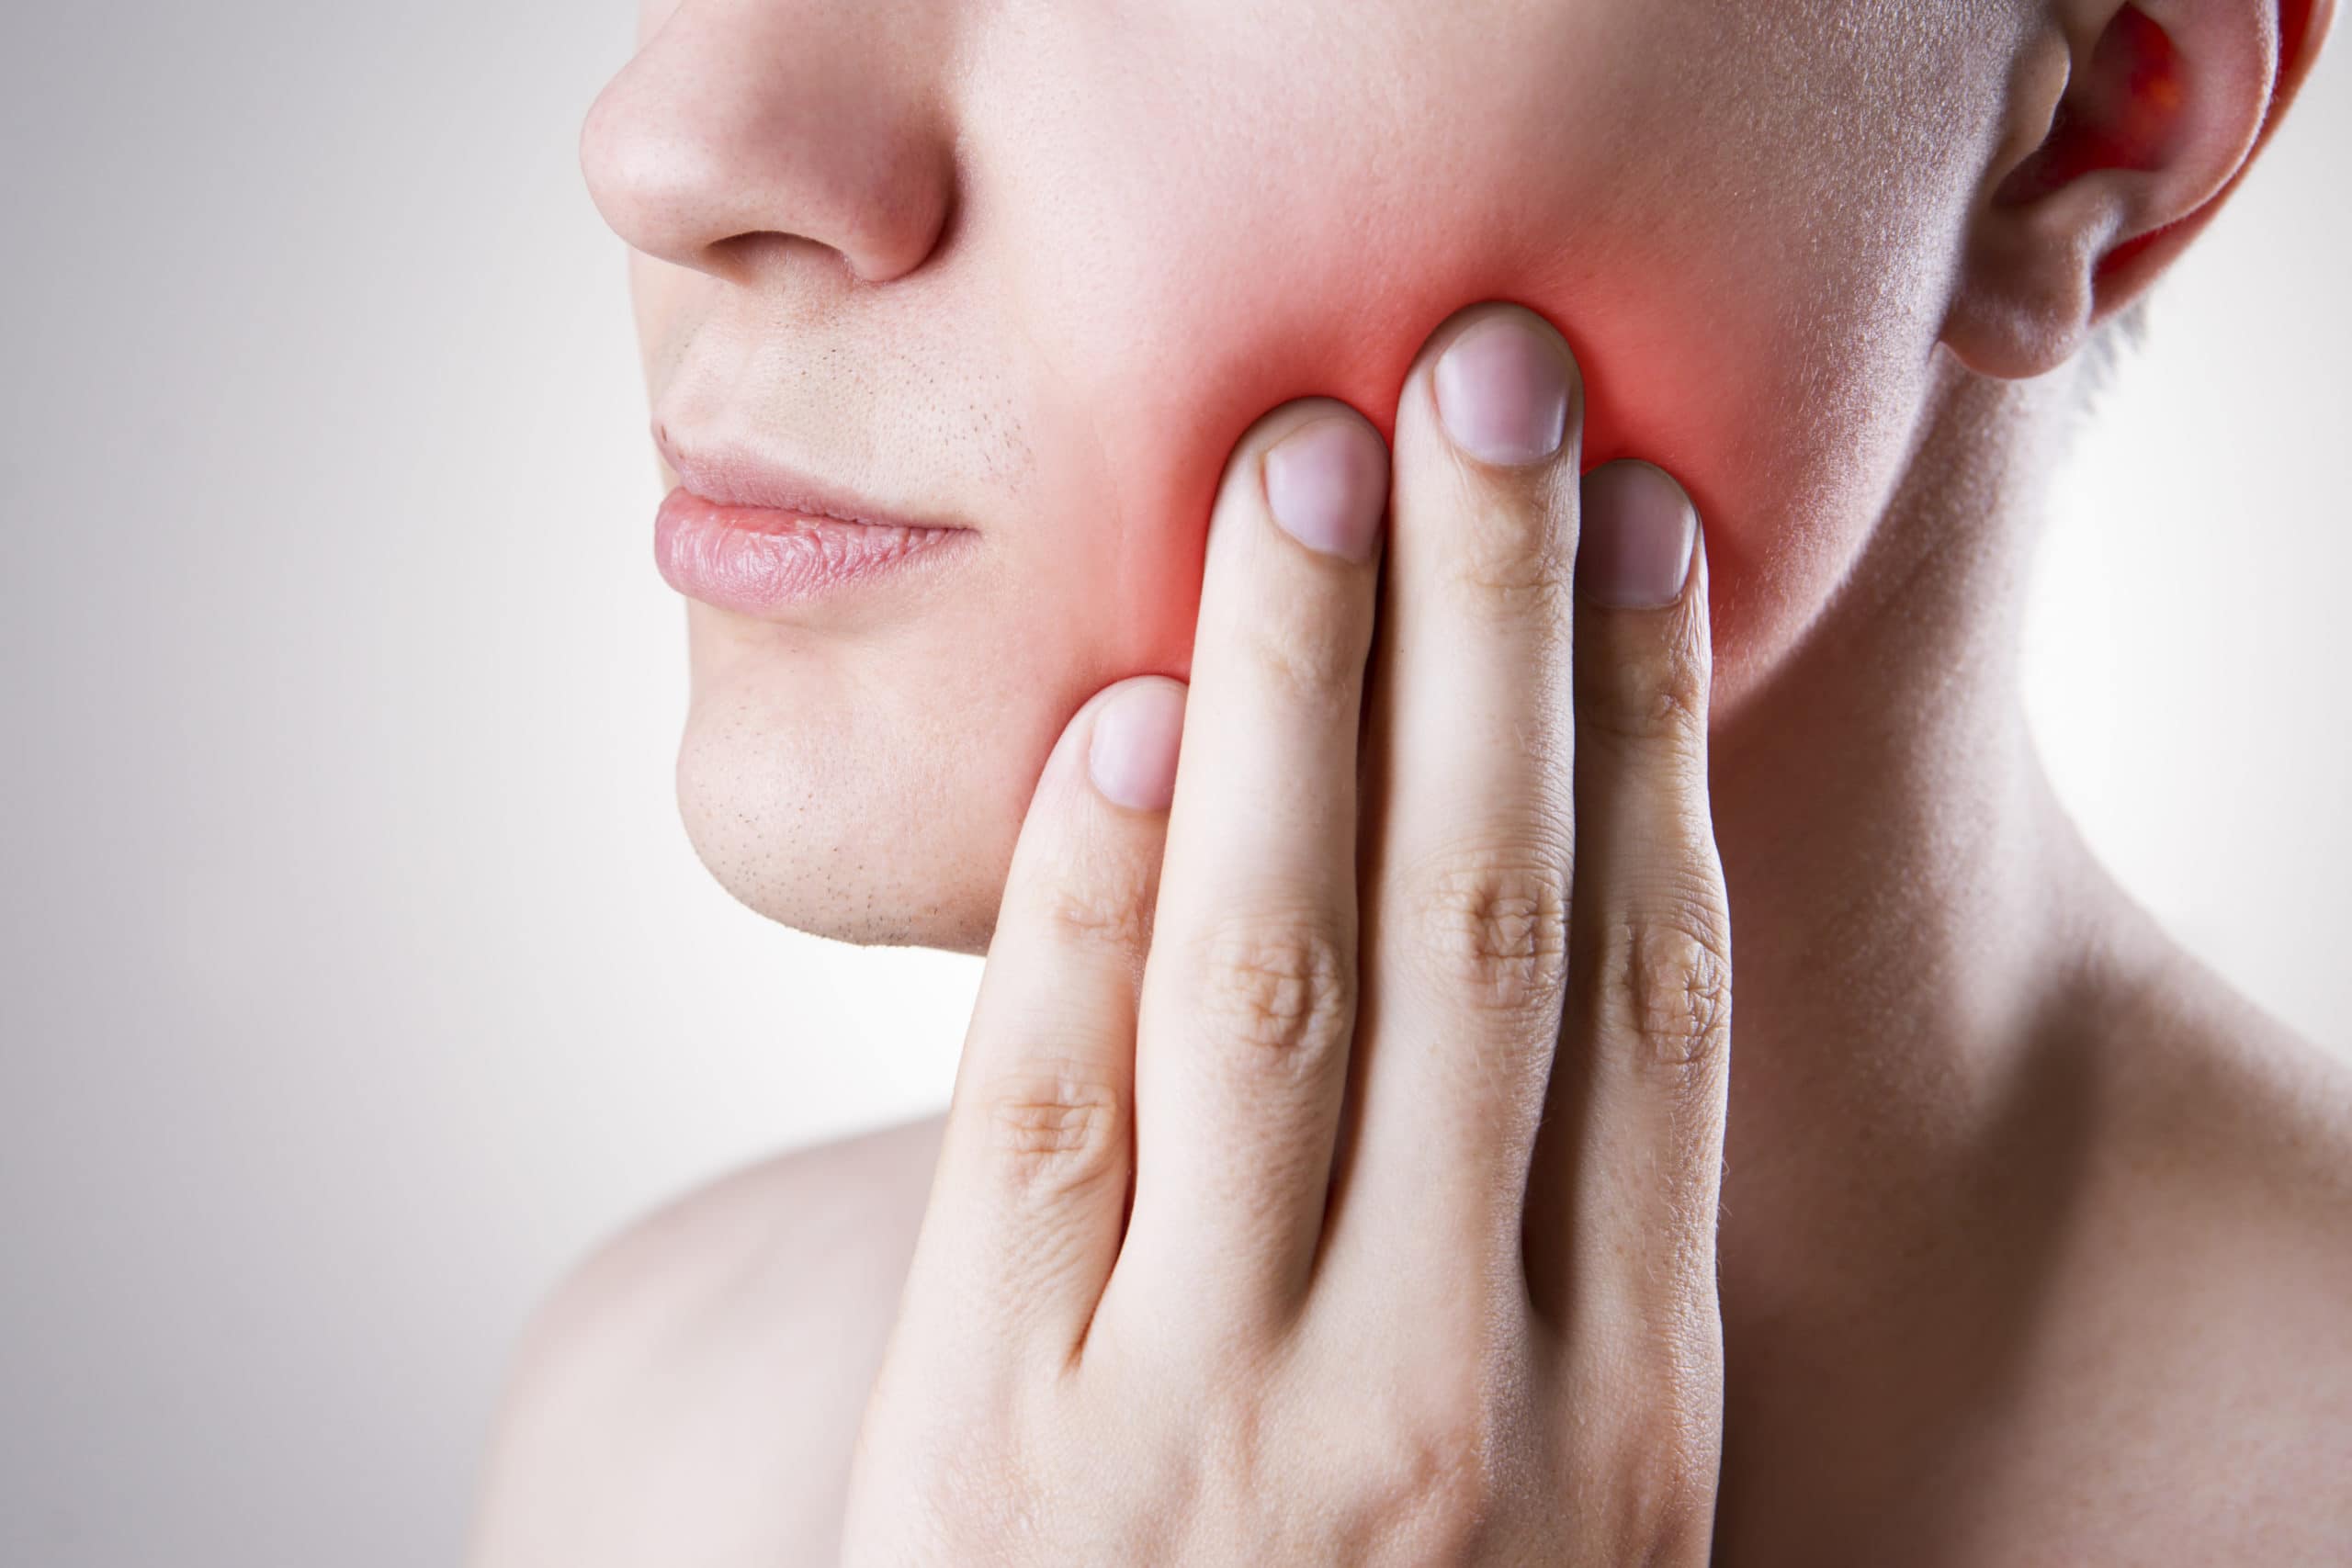 What To Do for Broken Tooth Pain